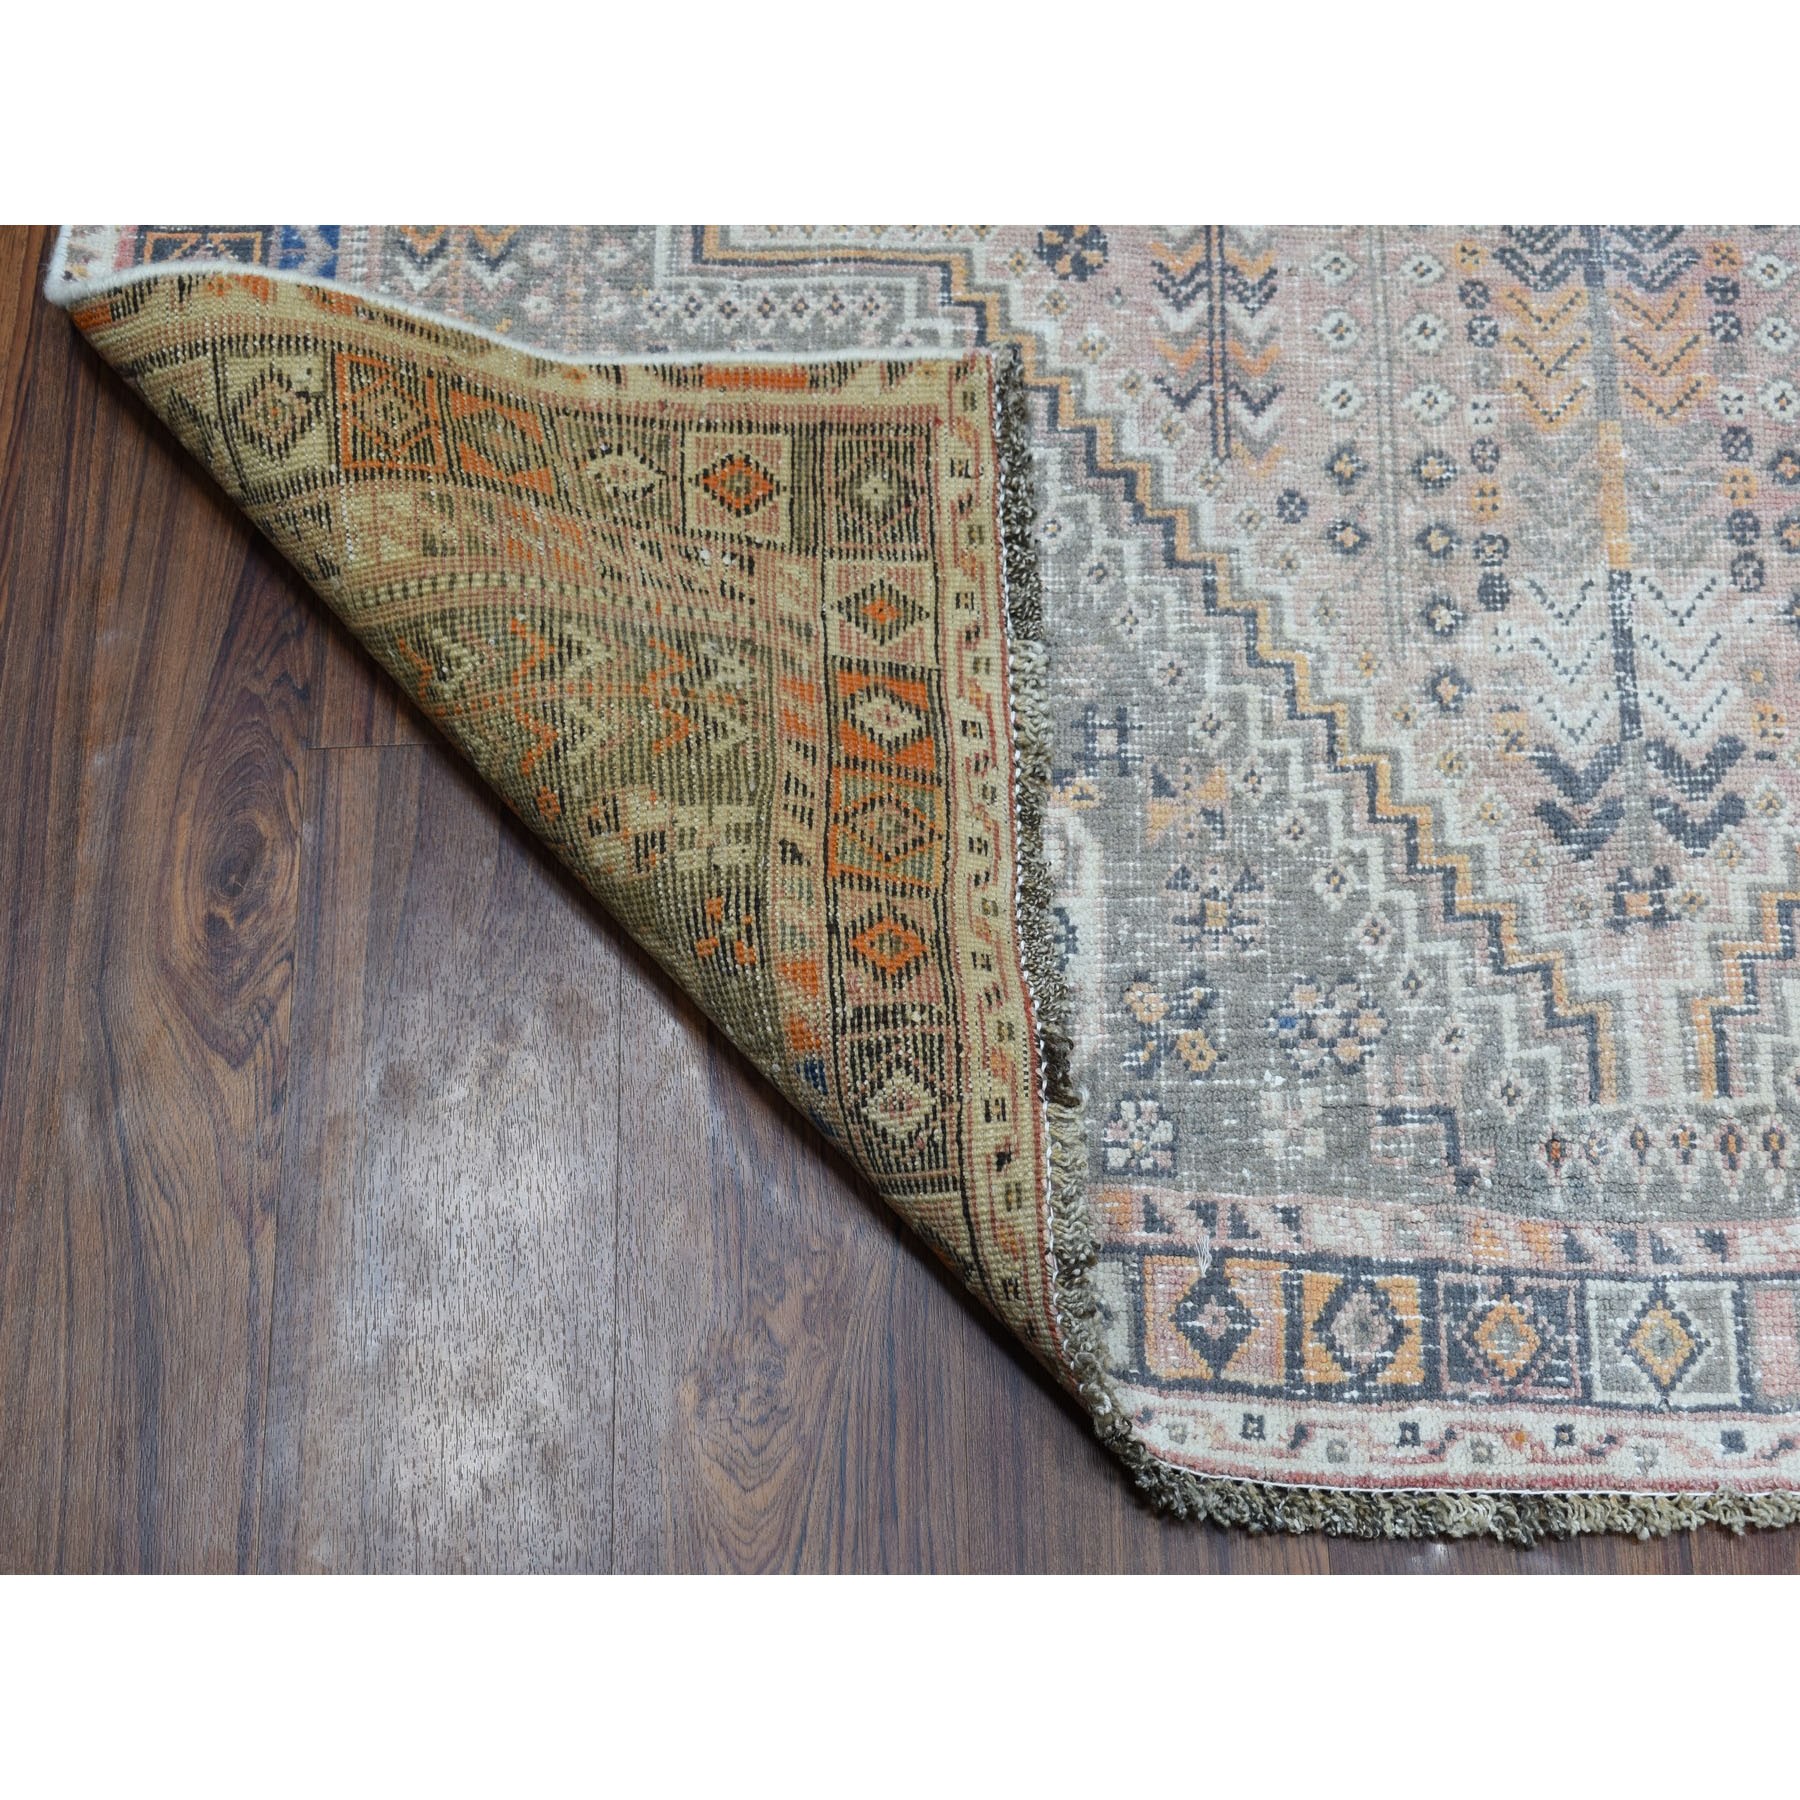 5-2 x8-10  Vintage And Worn Down Distressed Colors Persian Shiraz Hand Knotted Bohemian Rug 